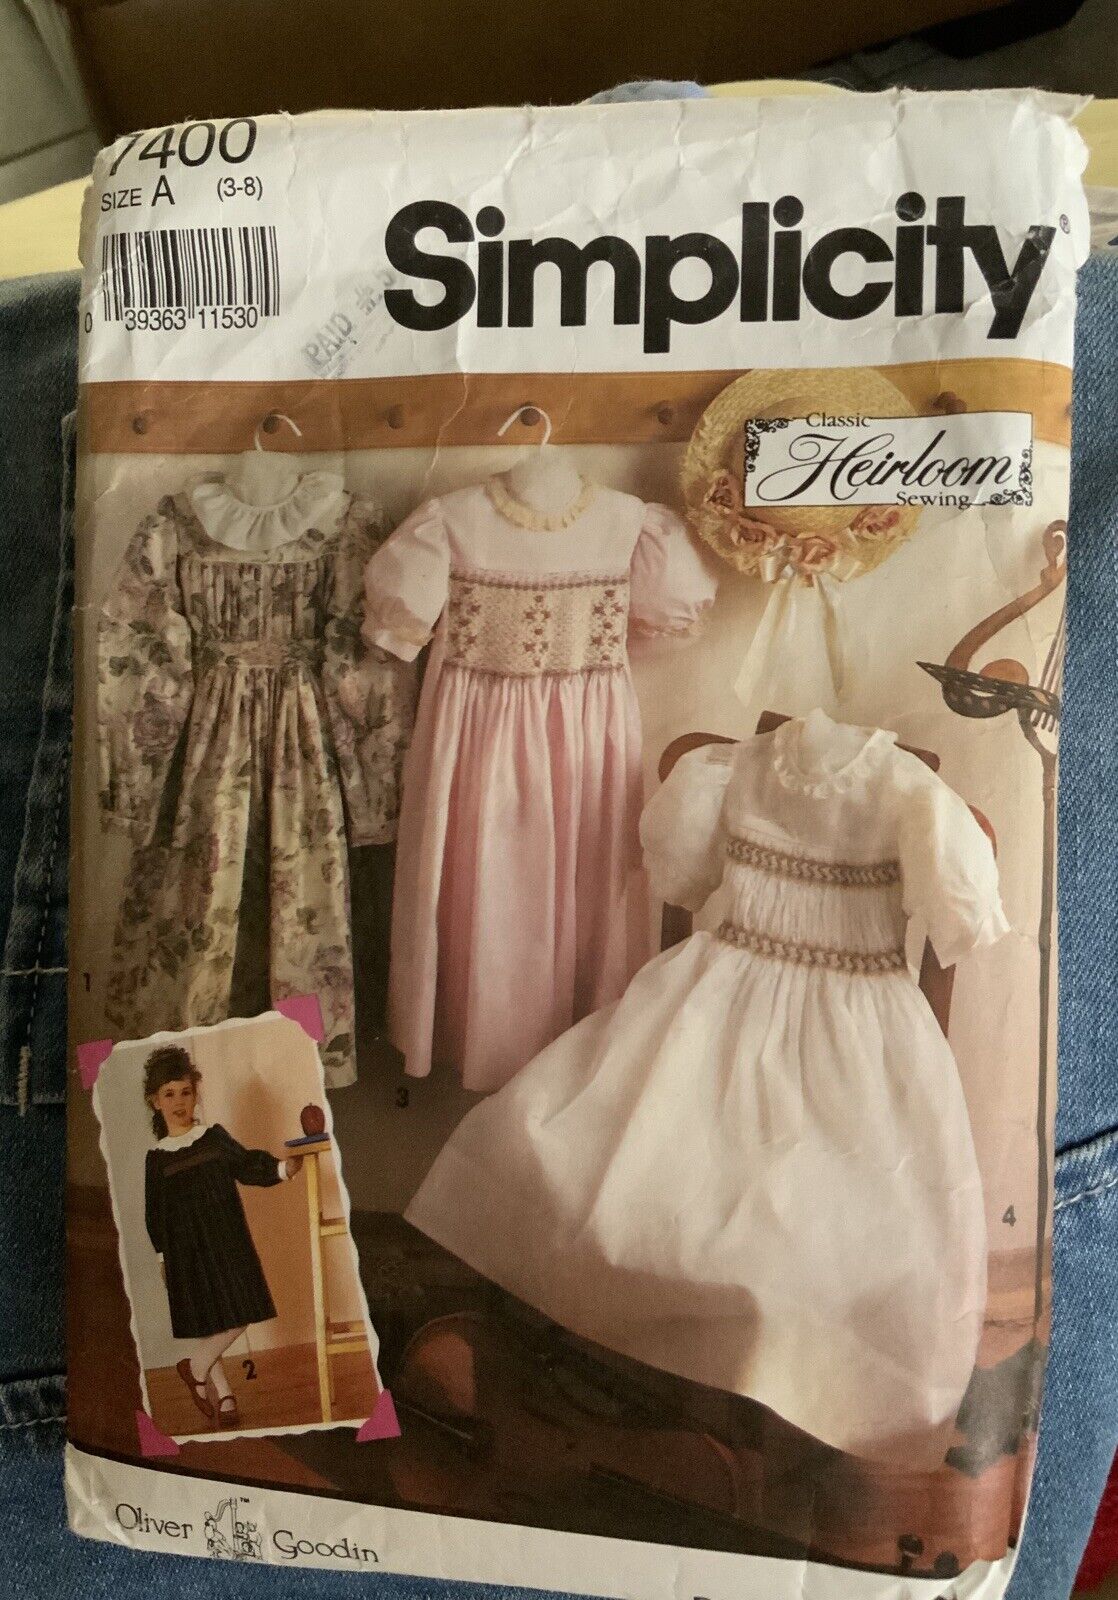 Simplicity Sewing Pattern 7400 Girls Size 3-8 1991 Cut & Complete 